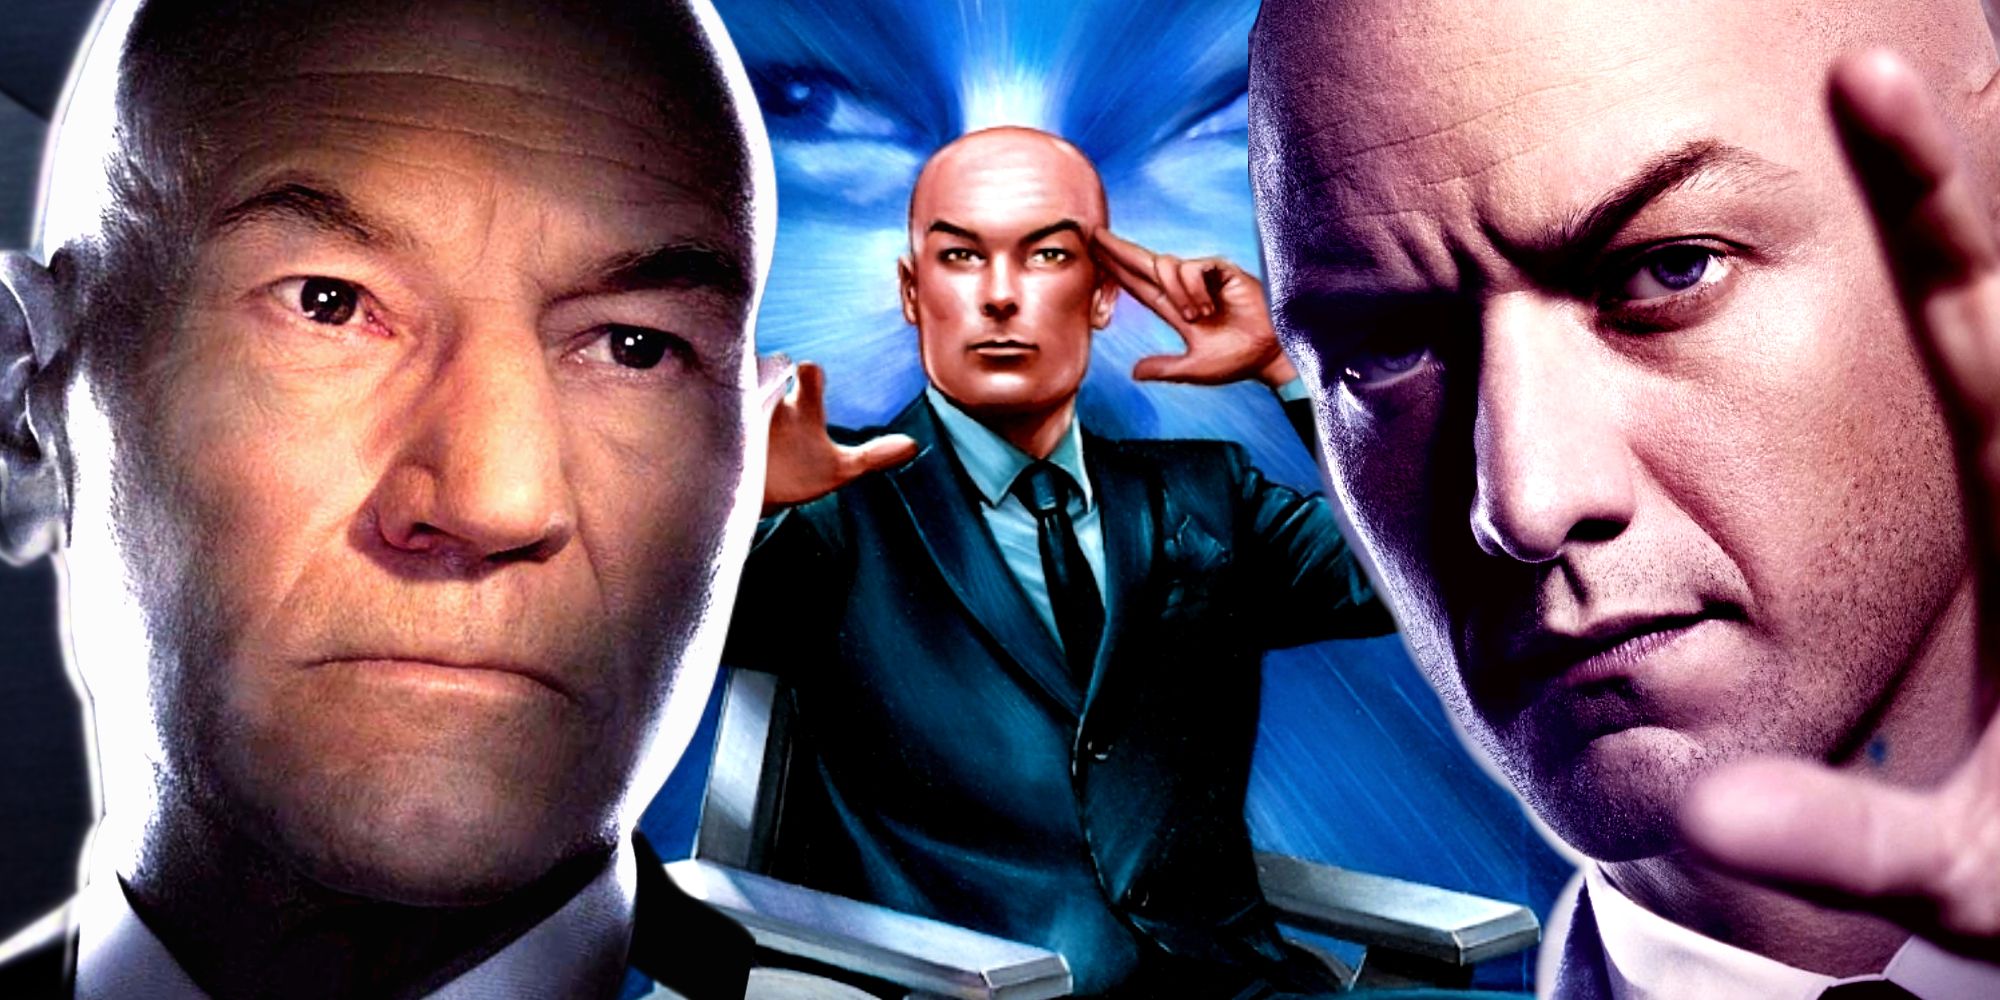 Patrick Stewart and James McAvoy as Professor X aka Charles Xavier in The X-Men Movies and Marvel Comics